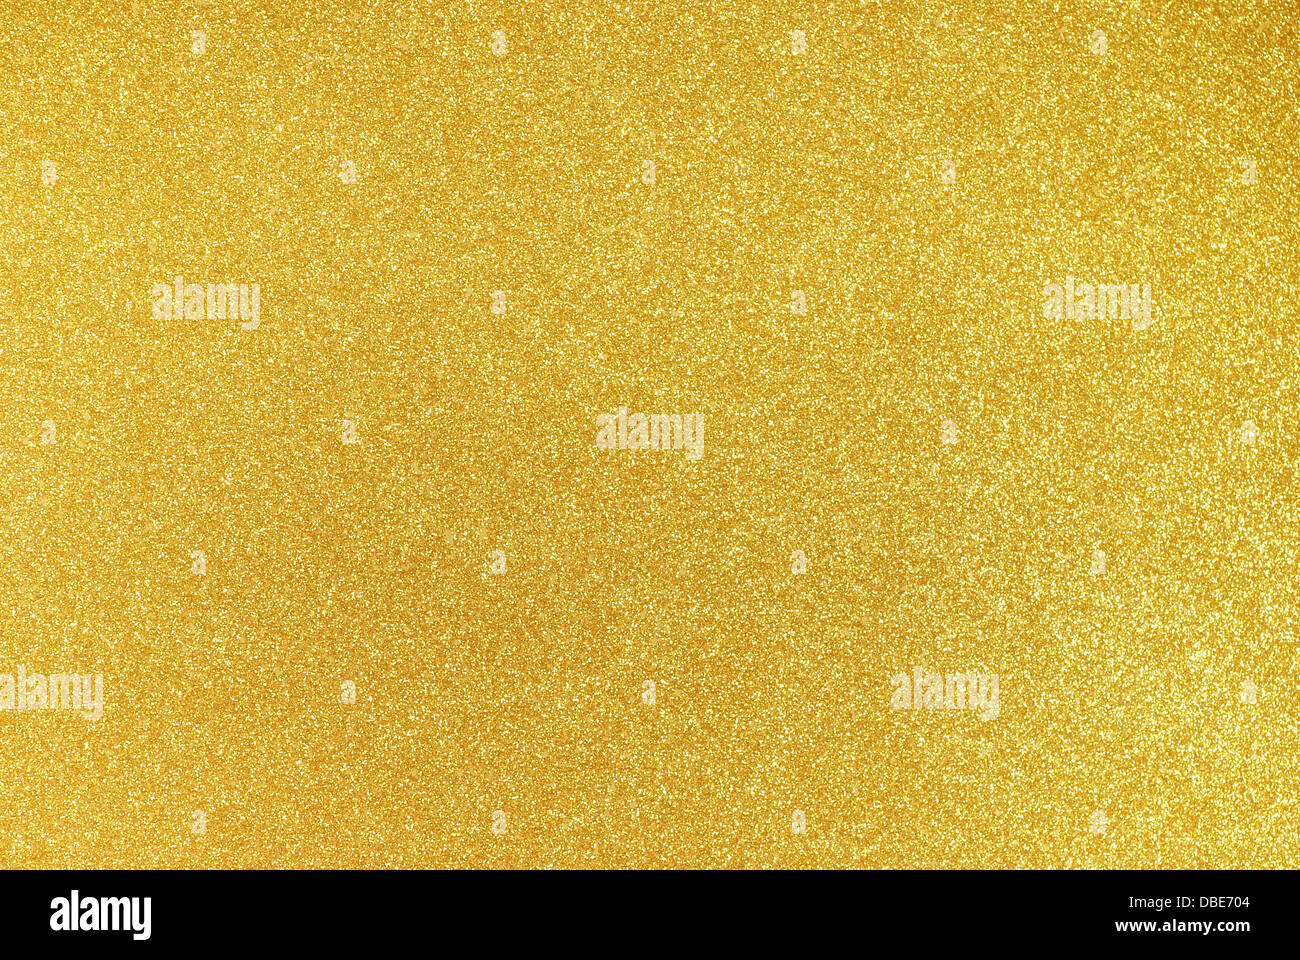 Background filled with shiny gold glitter Stock Photo